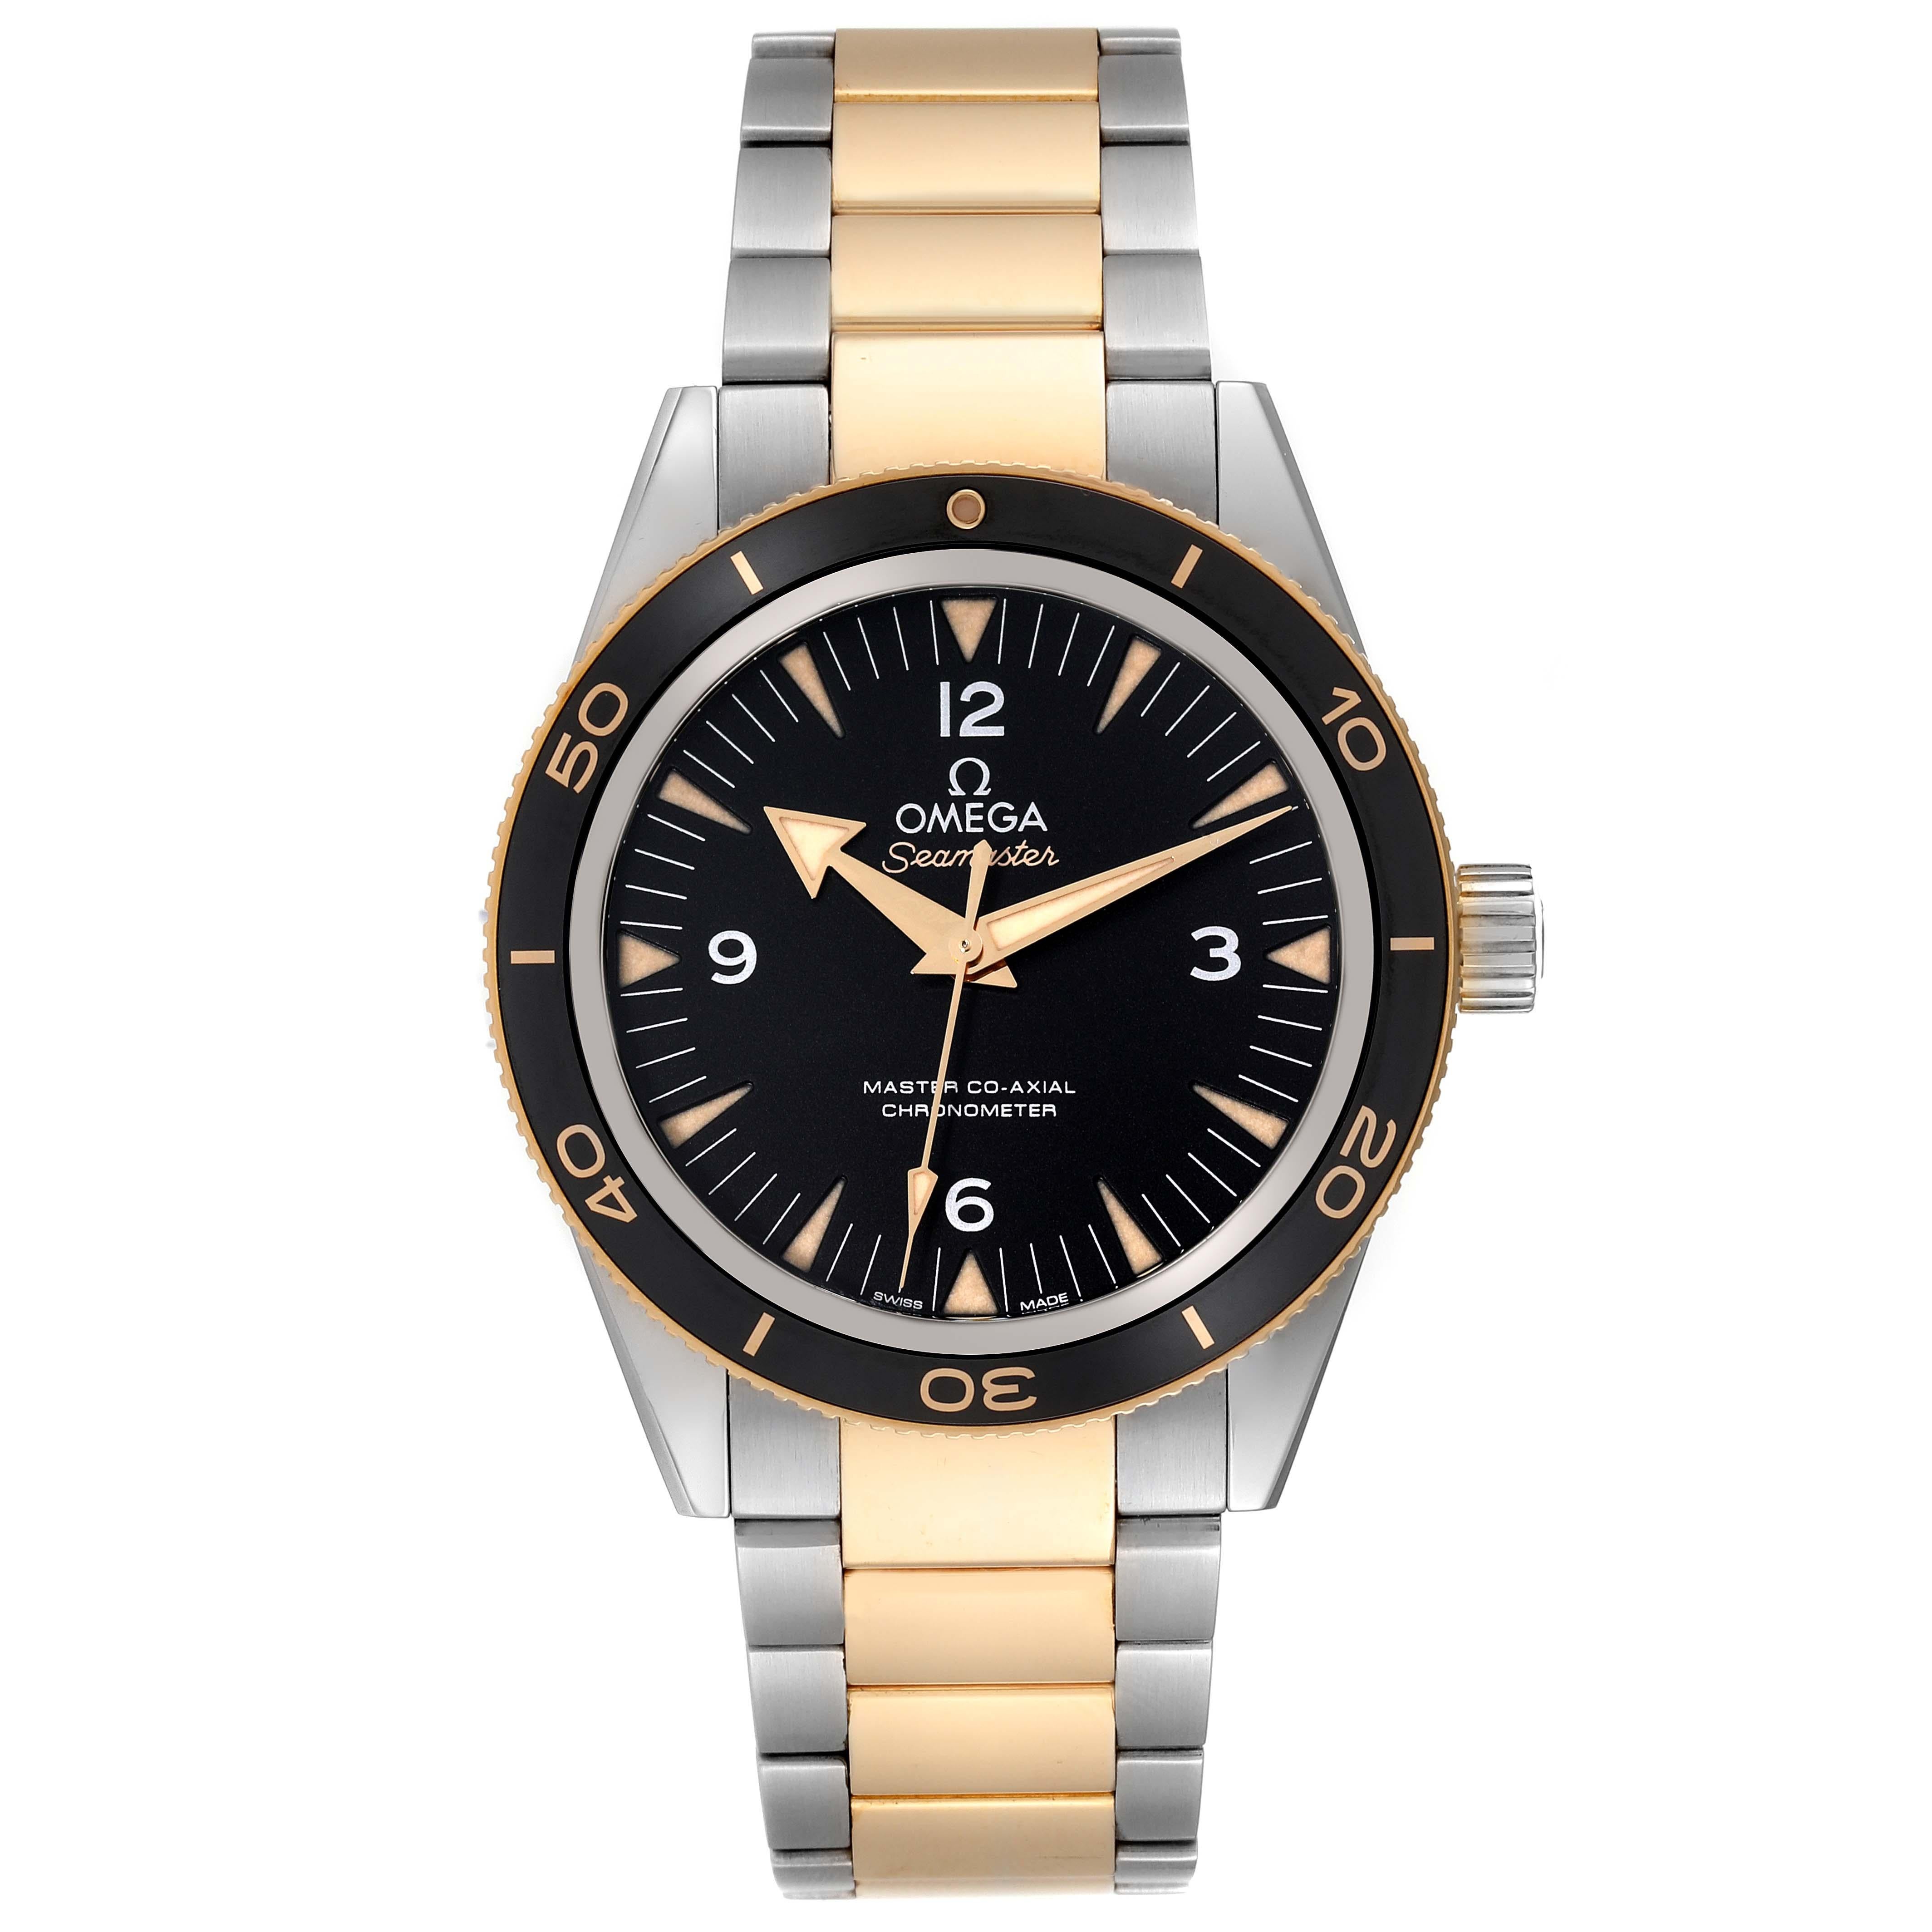 Omega Seamaster 300M Steel Yellow Gold Mens Watch 233.20.41.21.01.002 Card. Automatic self-winding movement with Co-Axial escapement. Resistant to magnetic fields greater than 15,000 gauss. Free sprung-balance with silicon balance spring, two